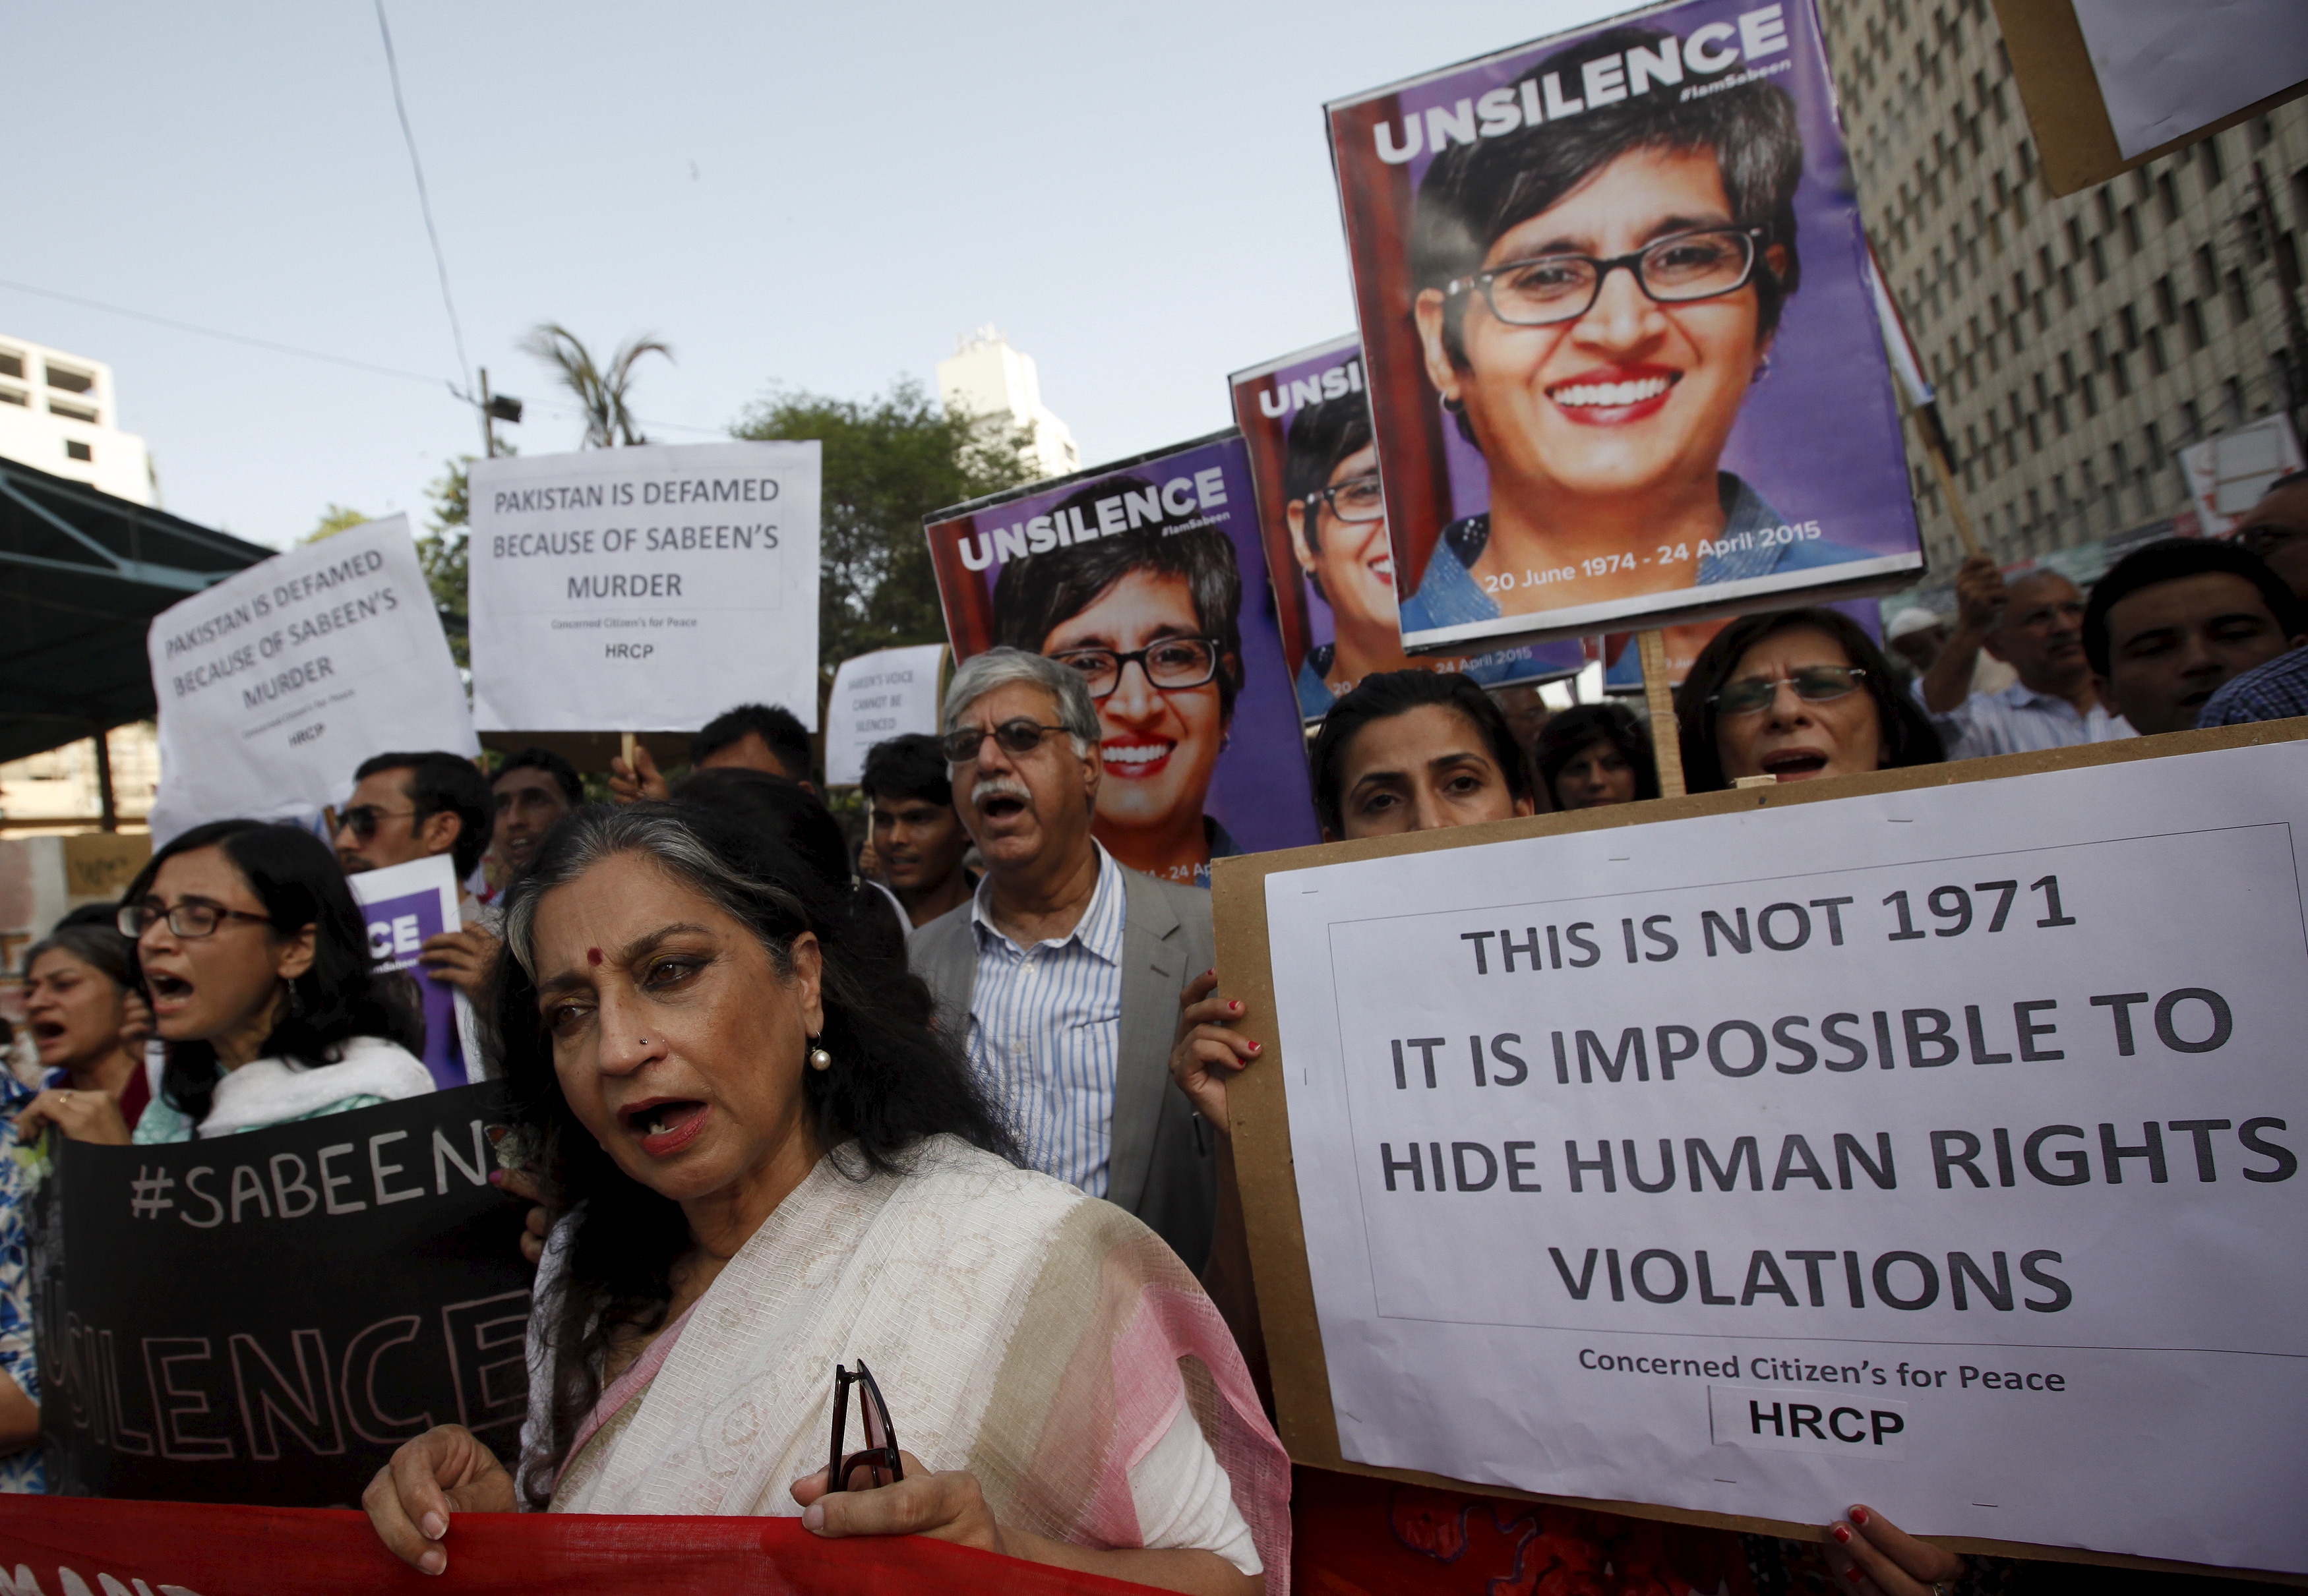 People chant slogans as they hold signs and pictures of Sabeen Mahmud, a human rights activist who was shot by gunmen, during a protest demanding justice outside the Press Club in  Karachi, Pakistan, April 30, 2015. (Akhtar Soomro—Reuters)